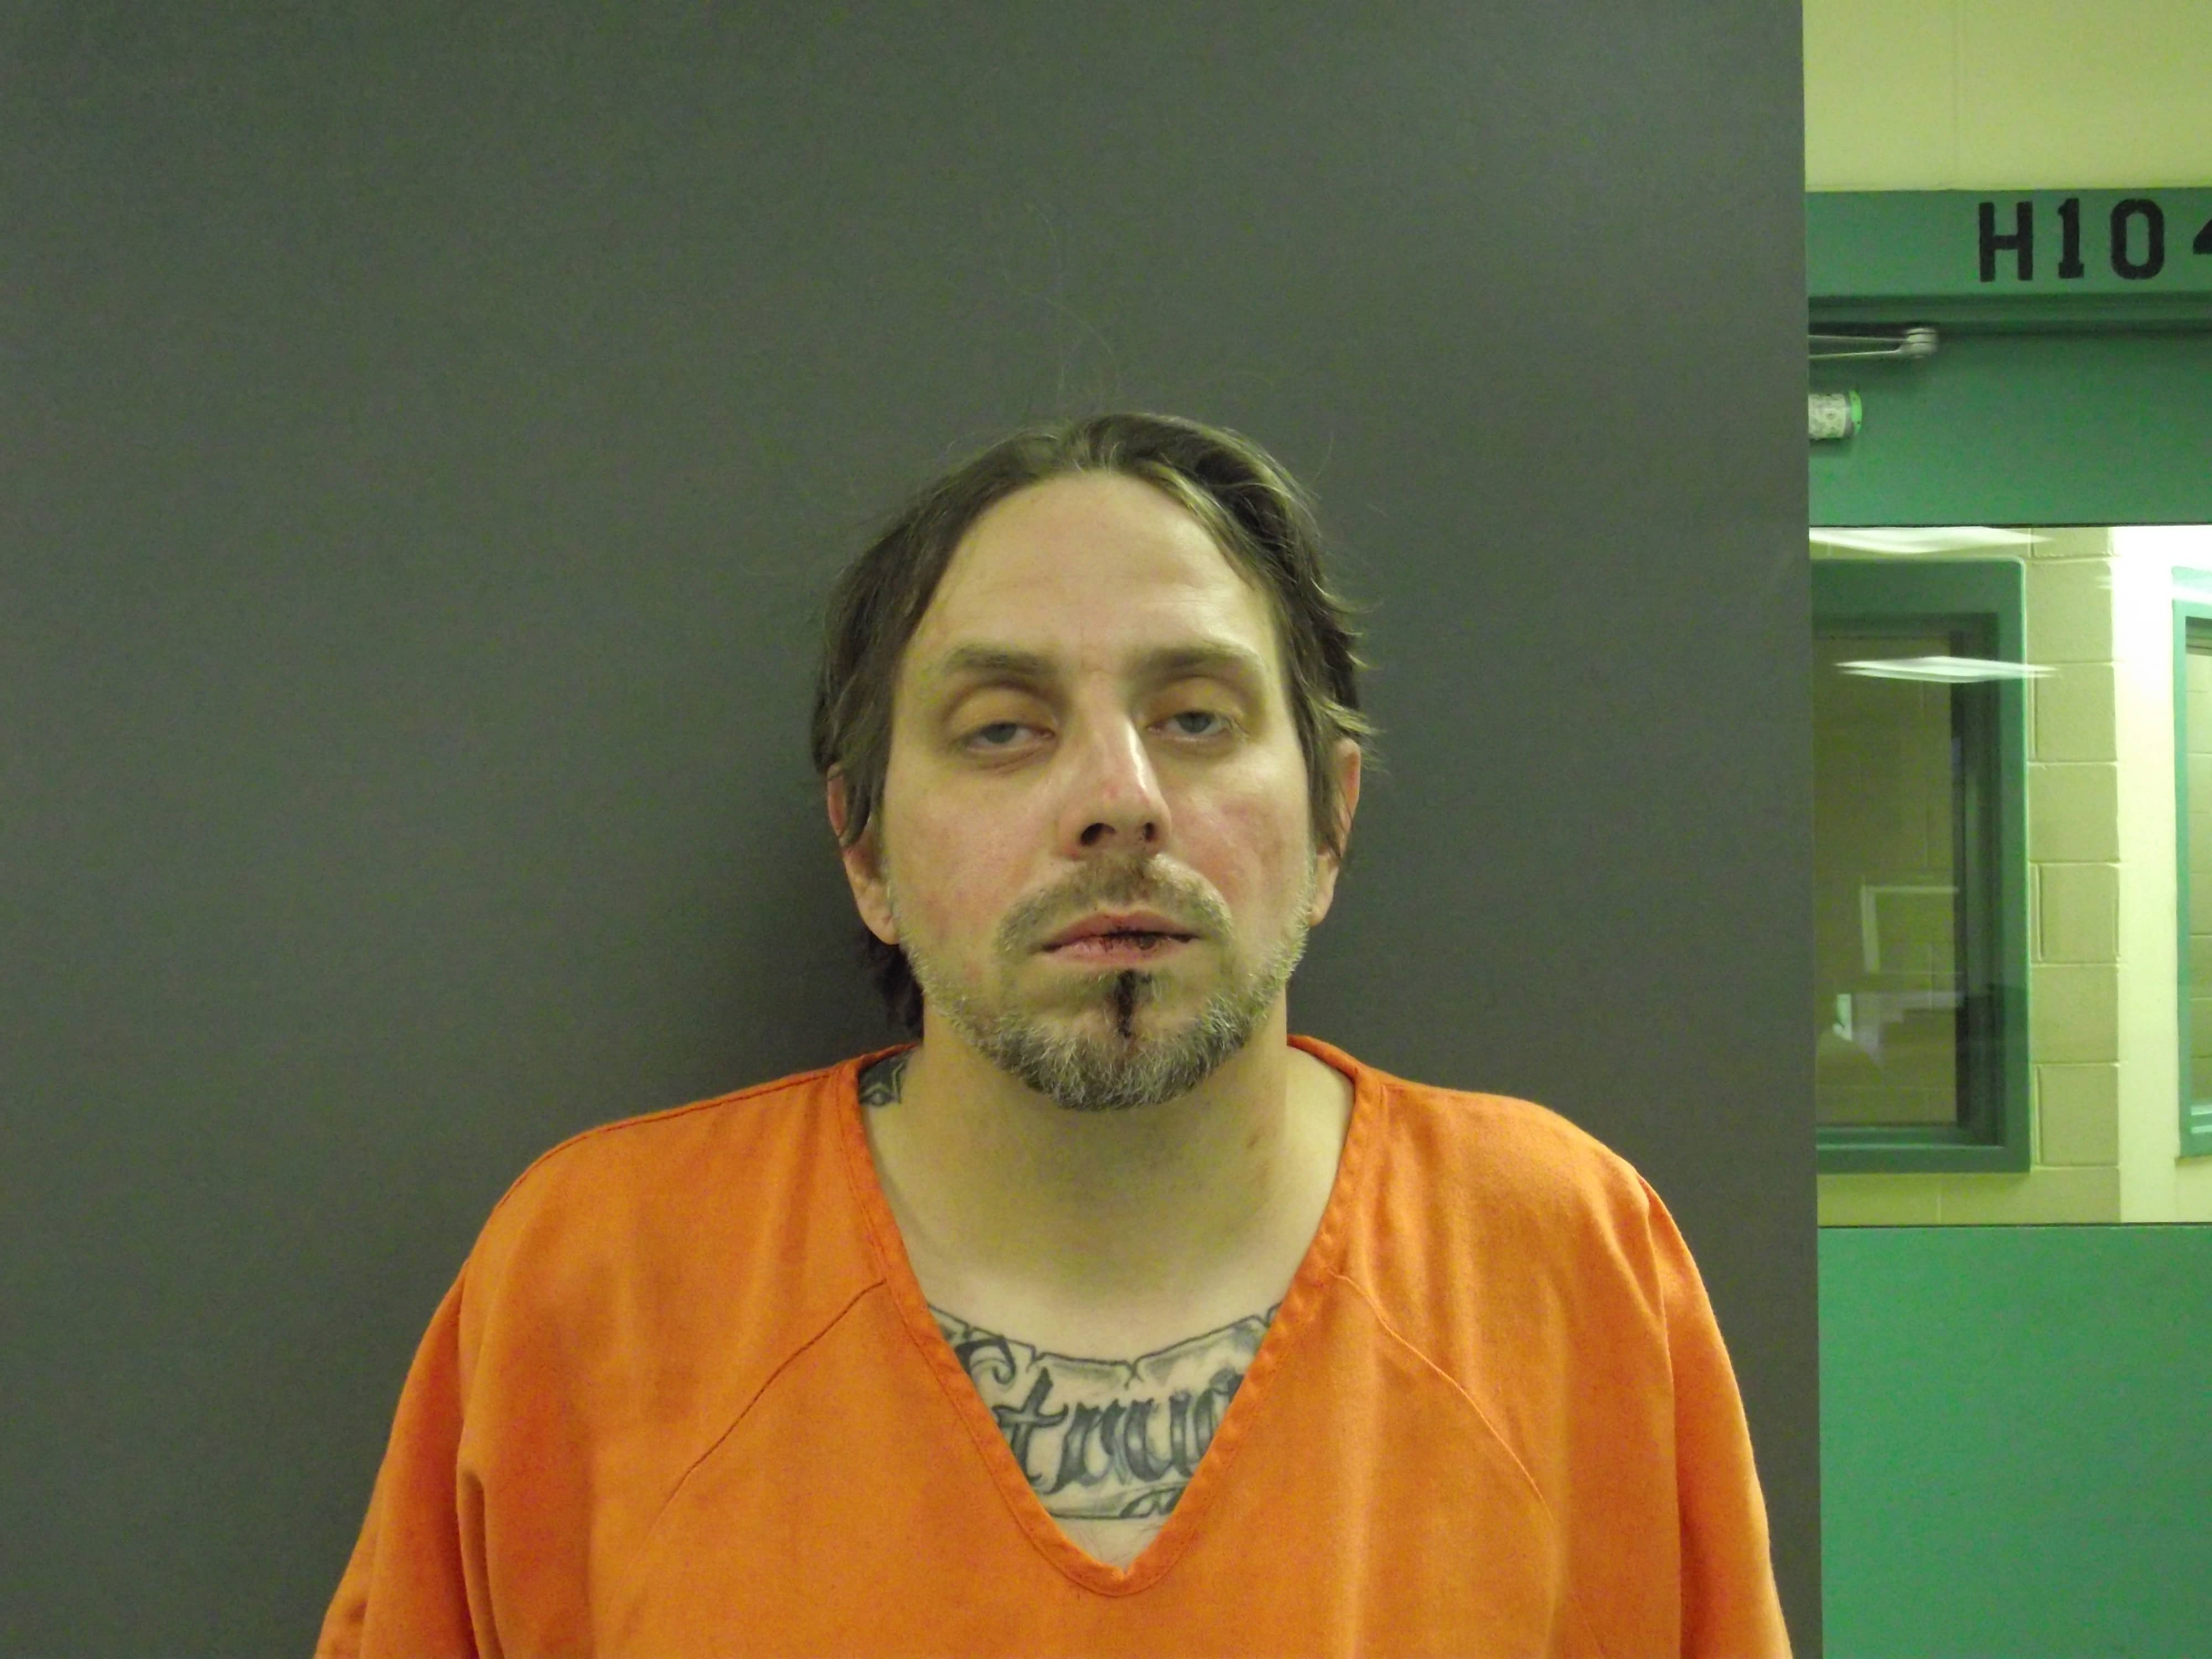 Terre Haute Man Arrested After 100 mph Chase In Parke County The